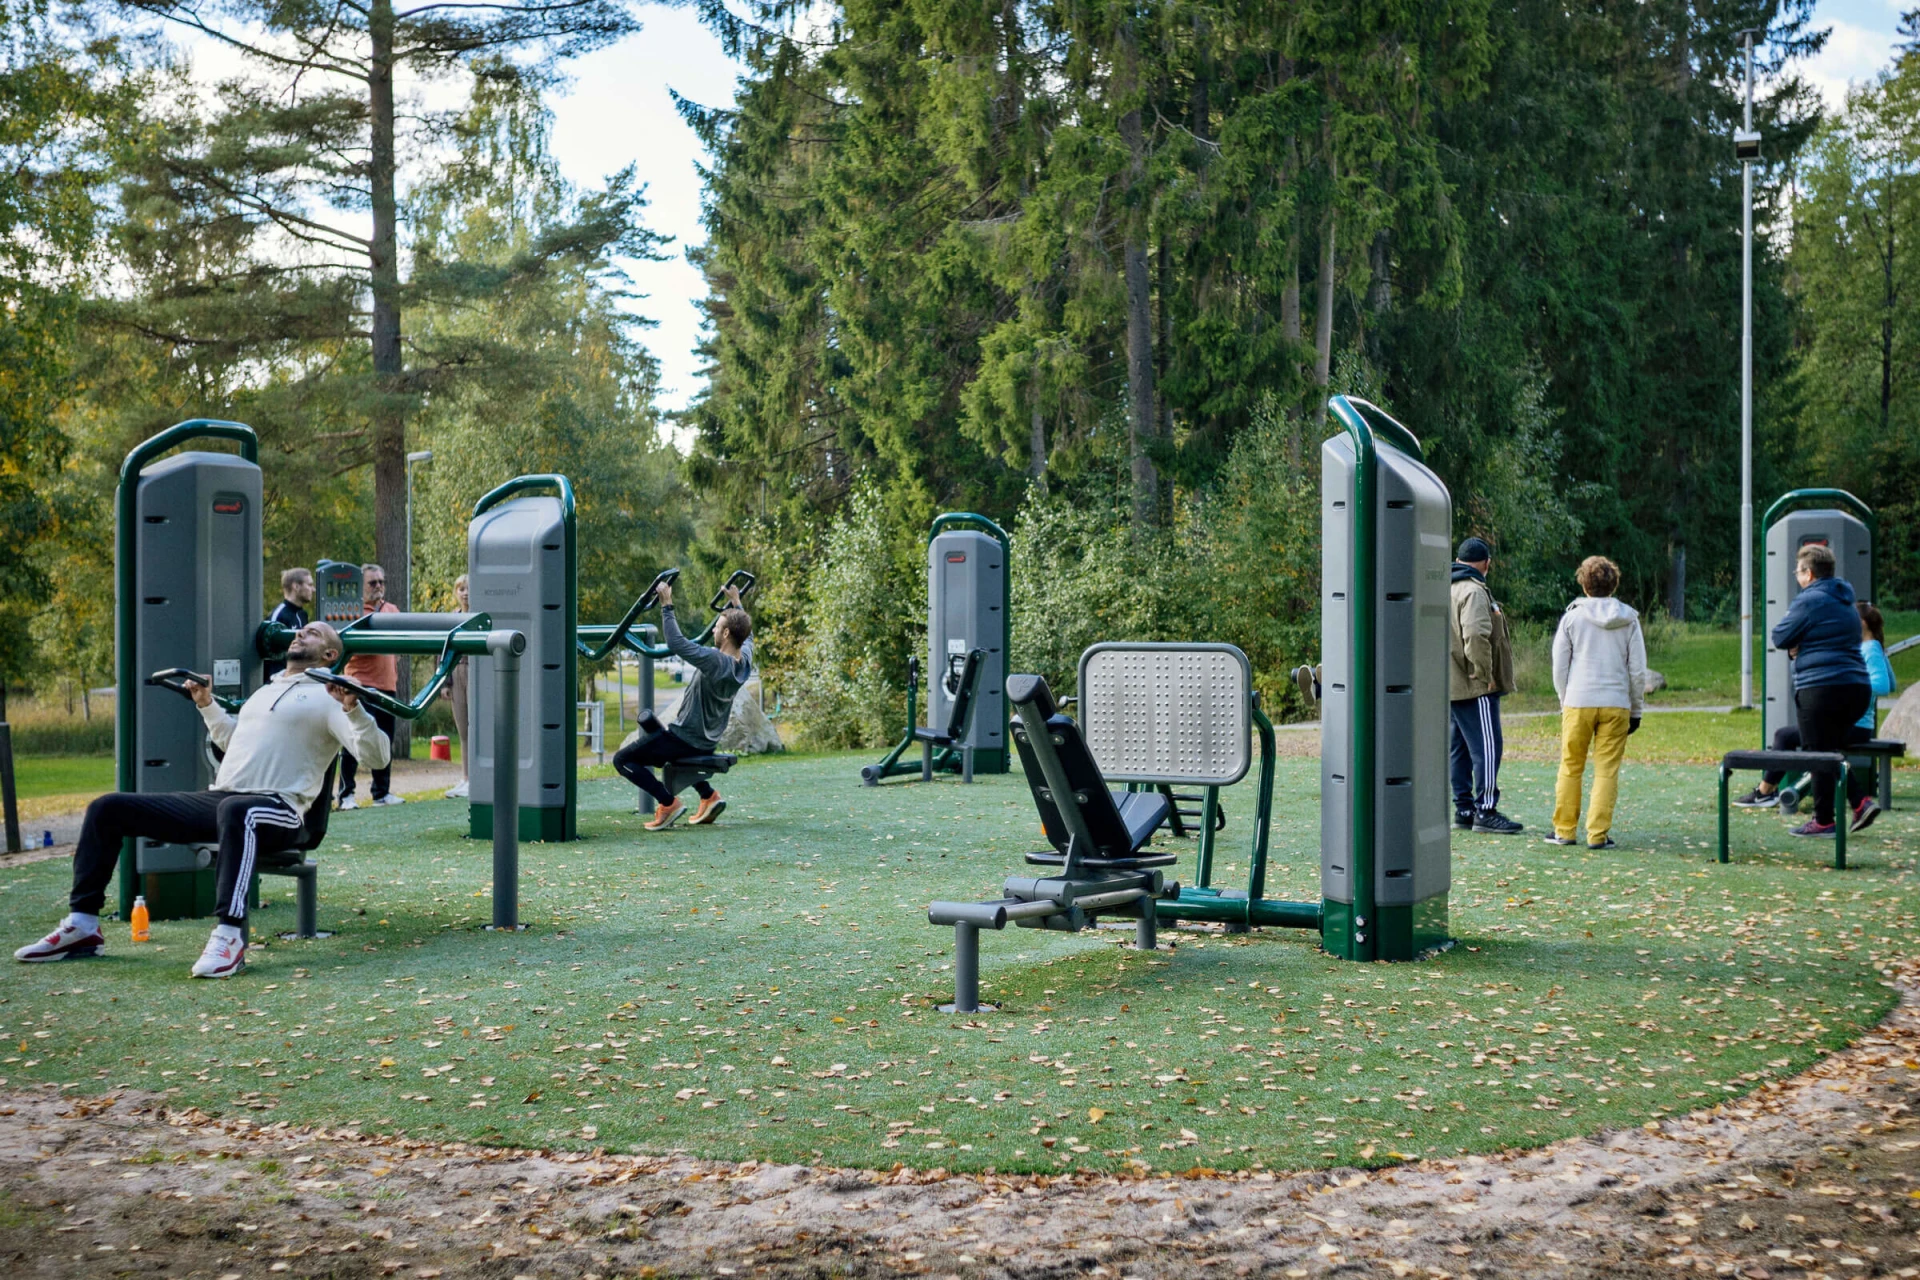 people working out on outdoor strength training equipment in Kypegården, Sweden